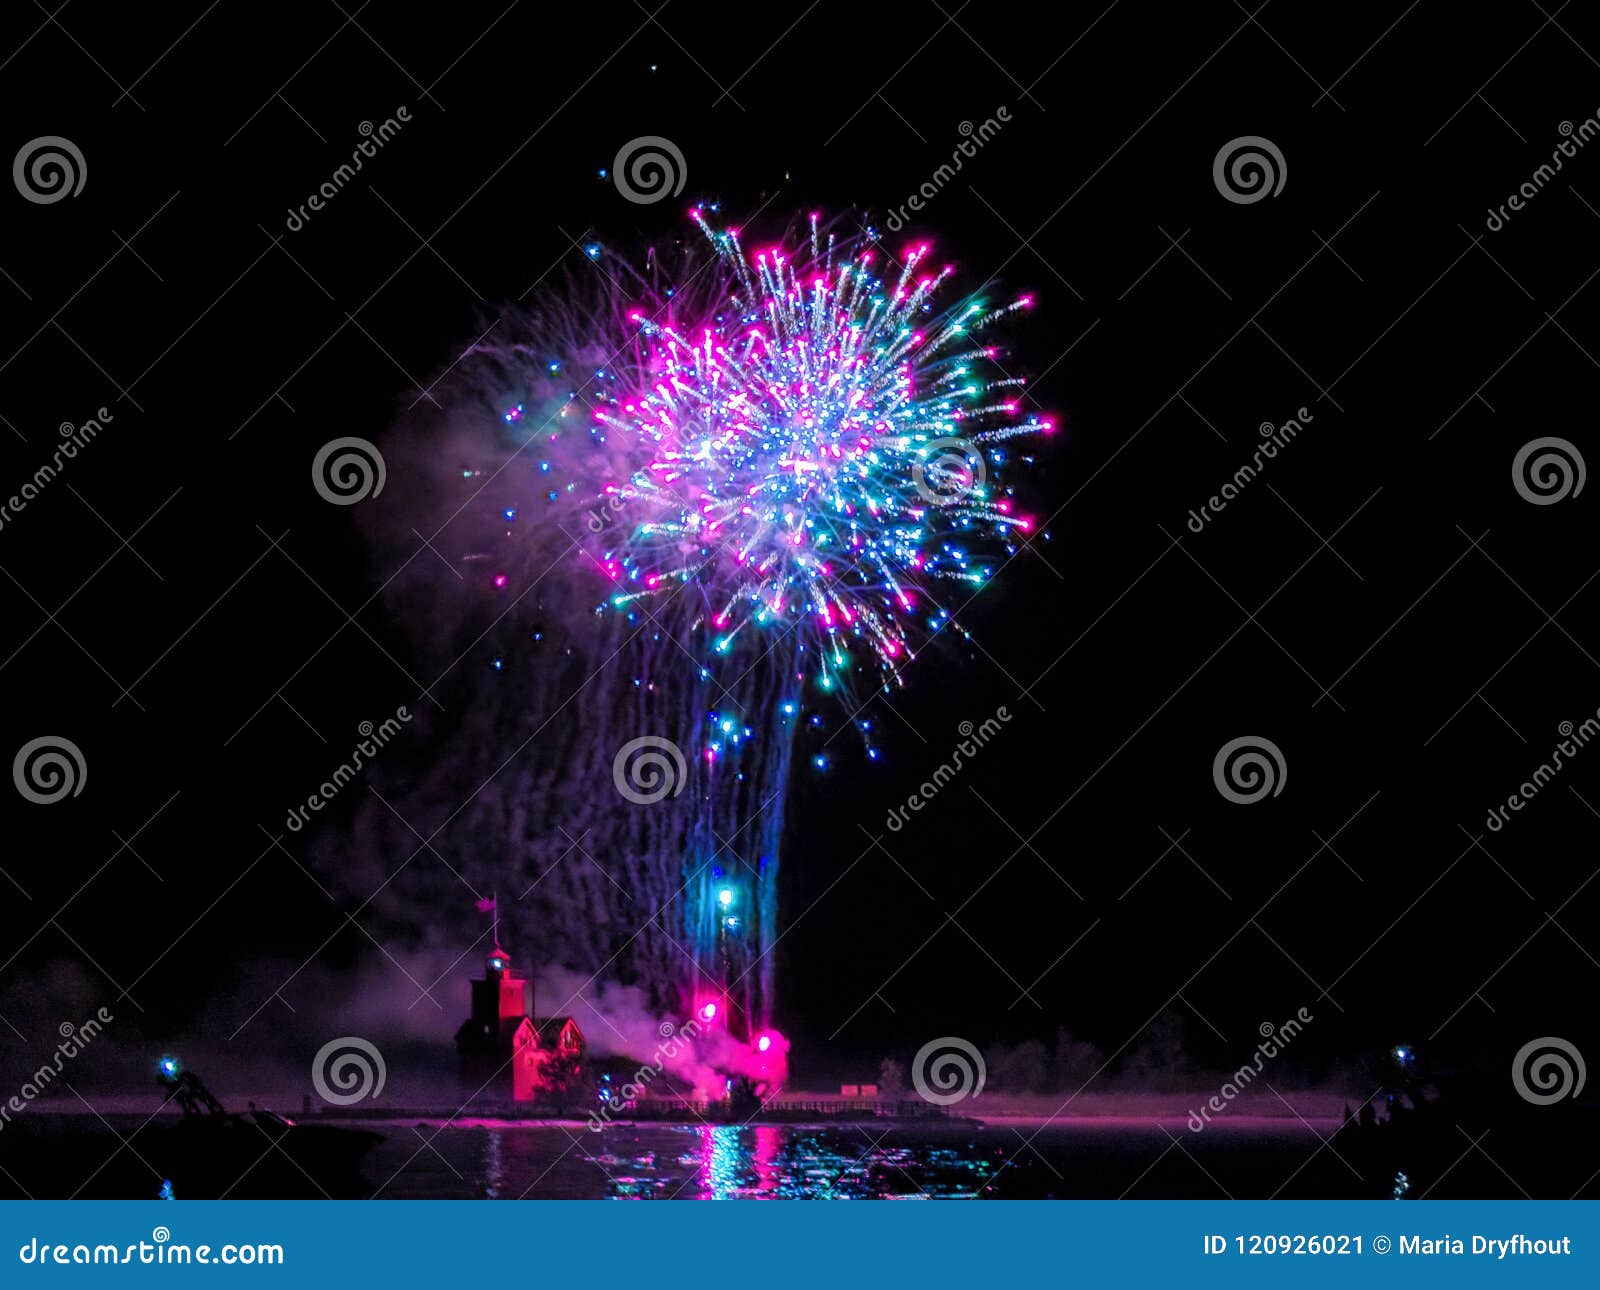 Fireworks in Holland Michigan Harbor Stock Image Image of party